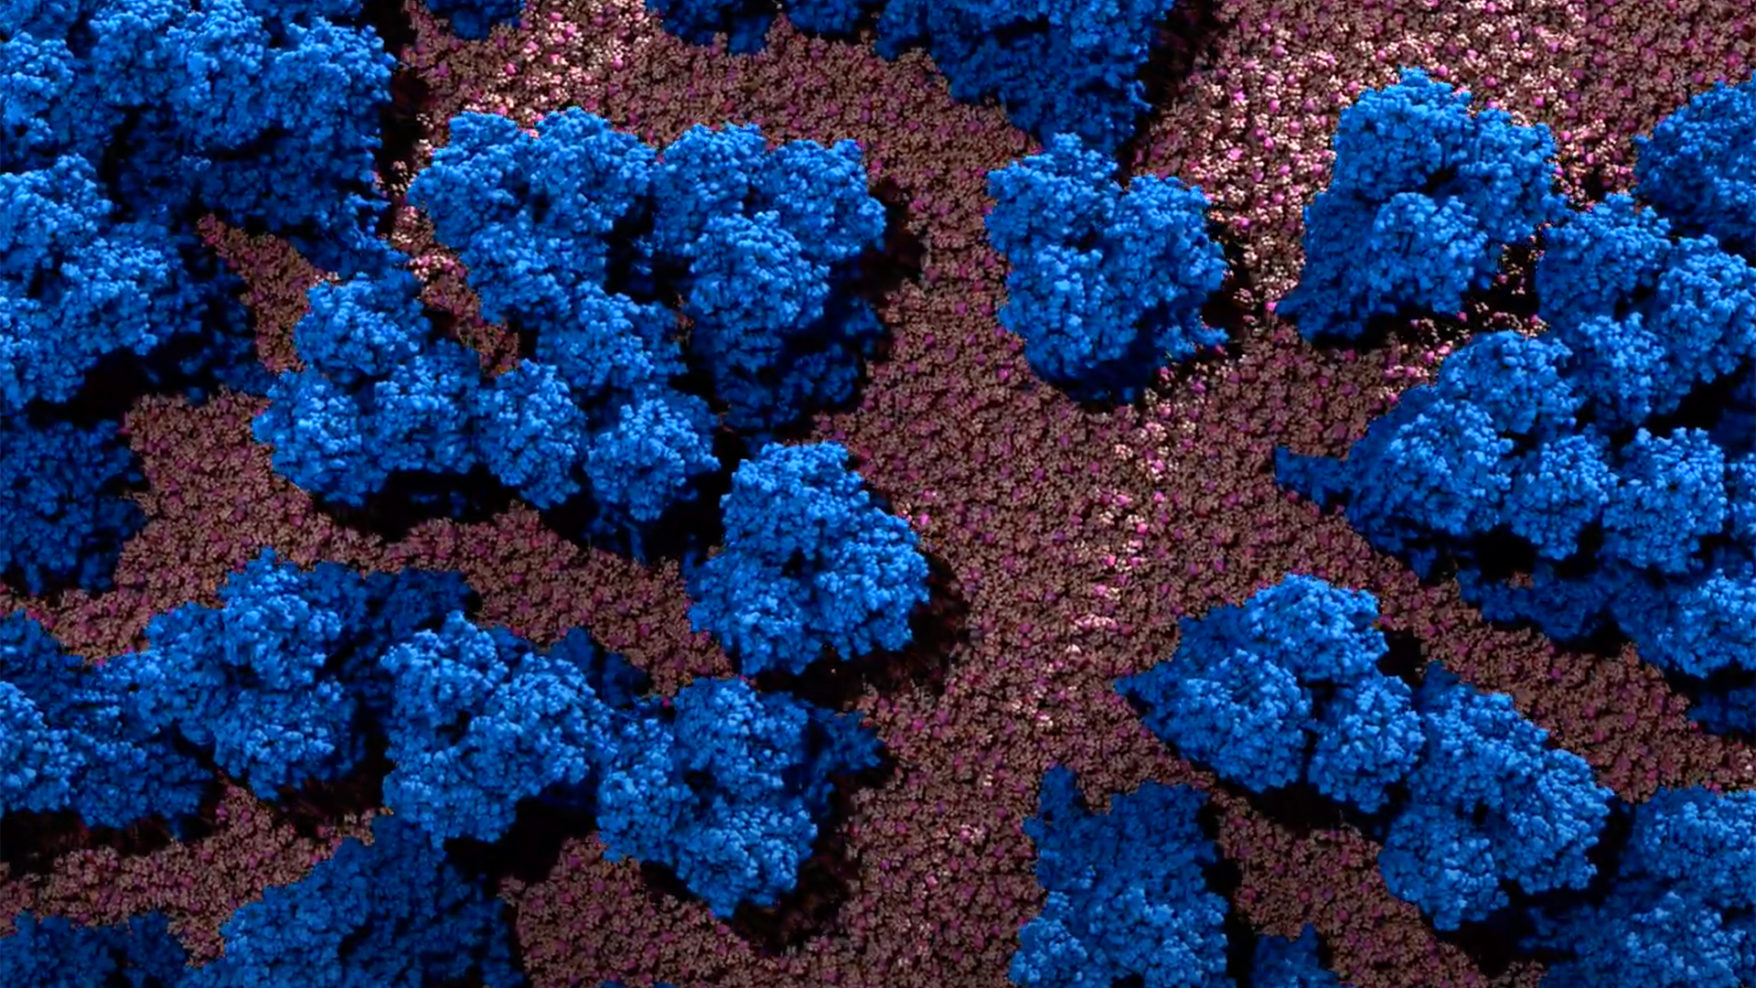 Simulation of the flu virus in clumps and cells of blue